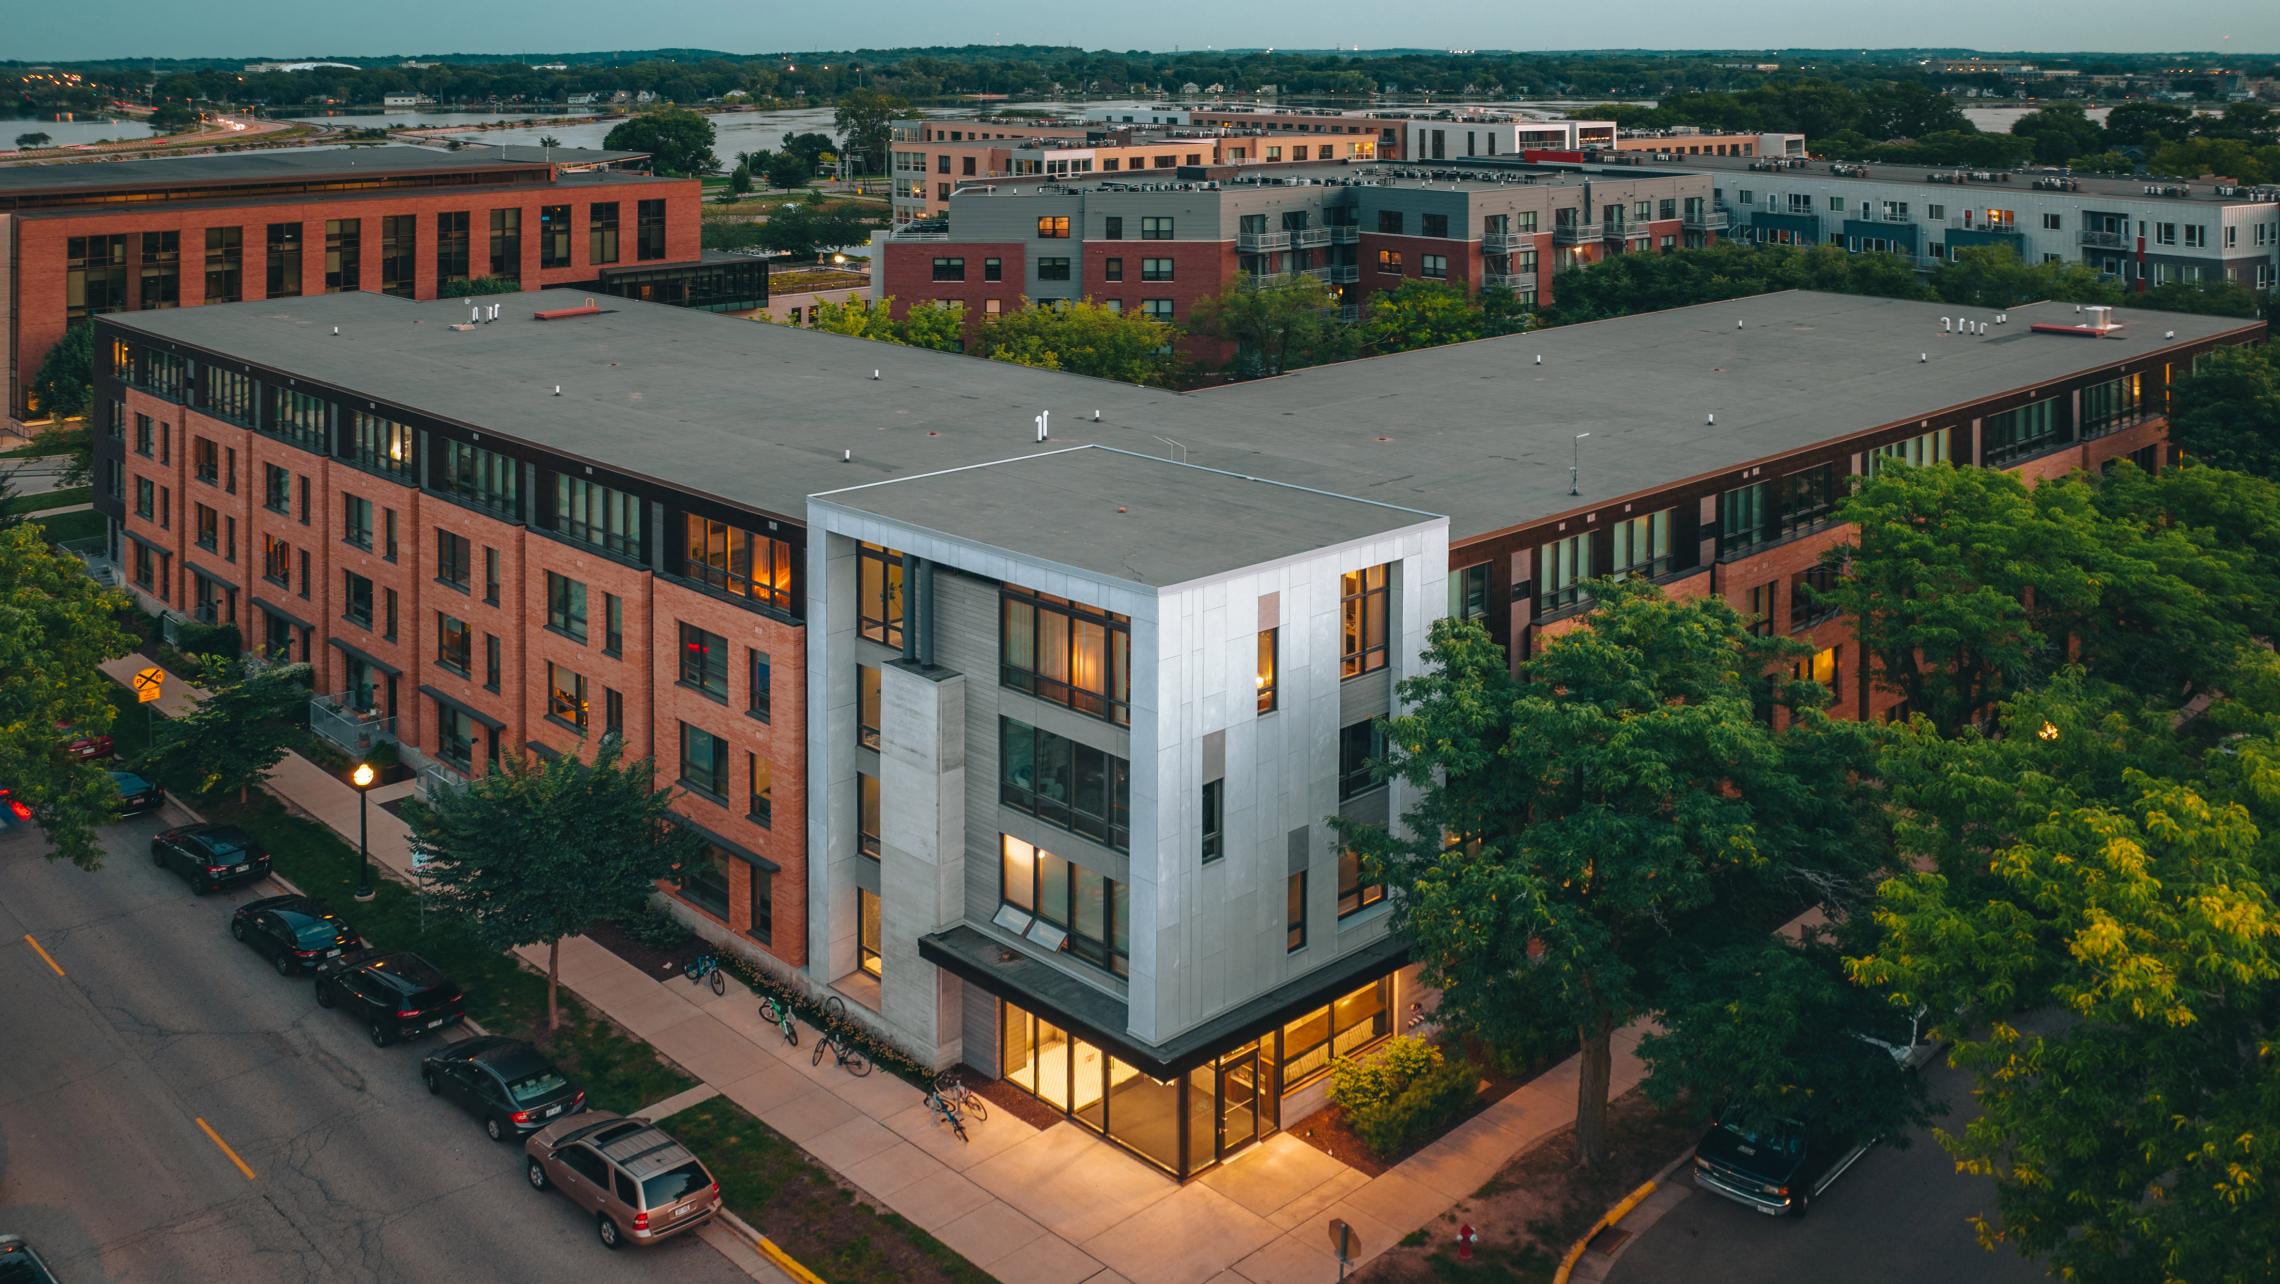 Quarter-Row-Apartments-Luxury-Upscale-Lifestyle-Fitness-Lounge-Views-Lake-Amenity-Modern-Balcony-Downtown-Lakeview-Madison-Capitol.jpg